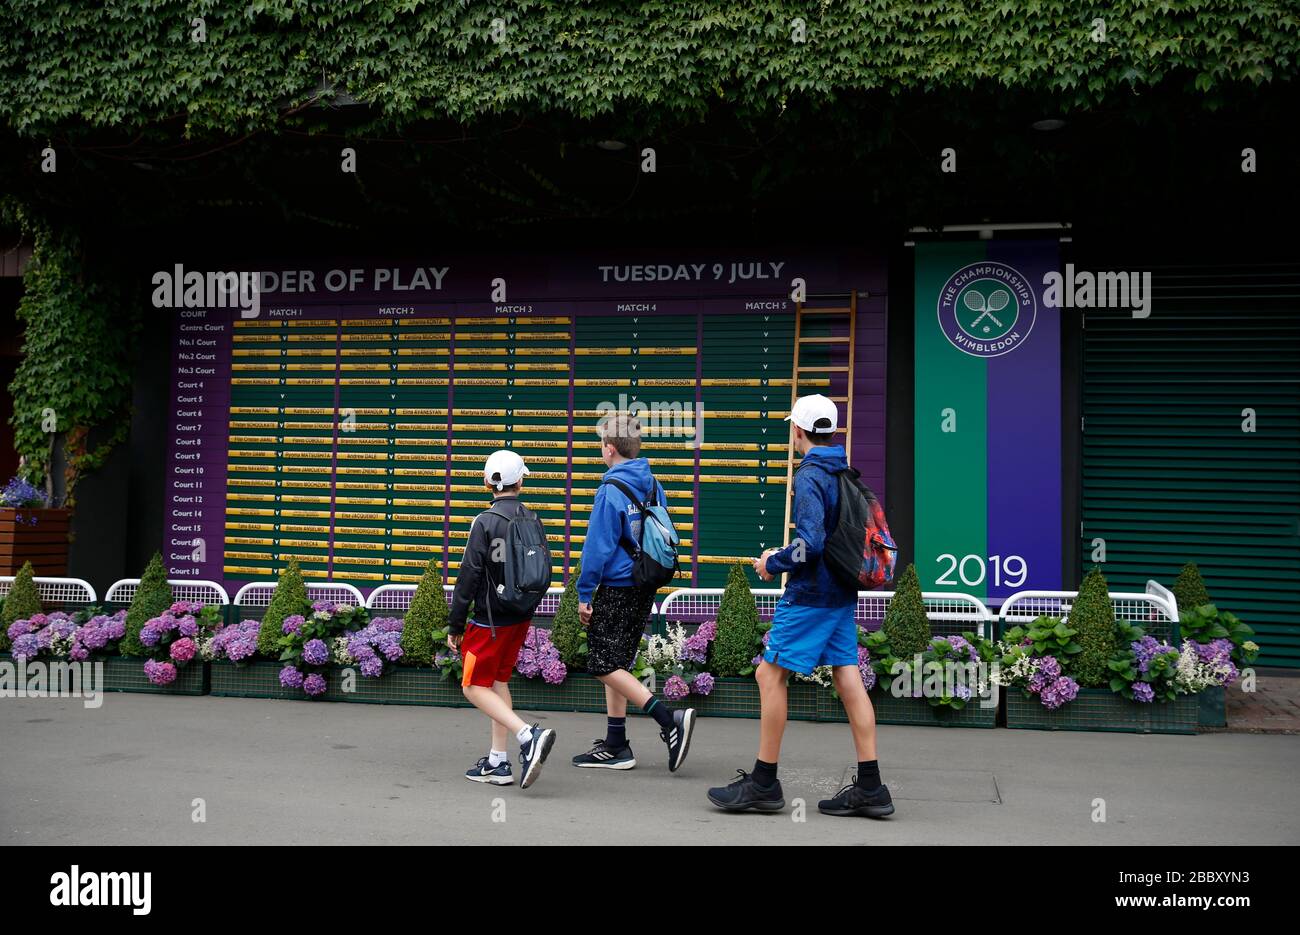 London, UK. 9th July, 2019. File photo taken on July 9, 2019 shows children passing by the order of play during Day 8 of the 2019 Wimbledon Tennis Championships in London, Britain. This year's Wimbledon has been cancelled due to the public health concerns related to the ongoing COVID-19 pandemic, the All England Club (AELTC) announced after an emergency meeting on Wednesday. Credit: Han Yan/Xinhua/Alamy Live News Stock Photo